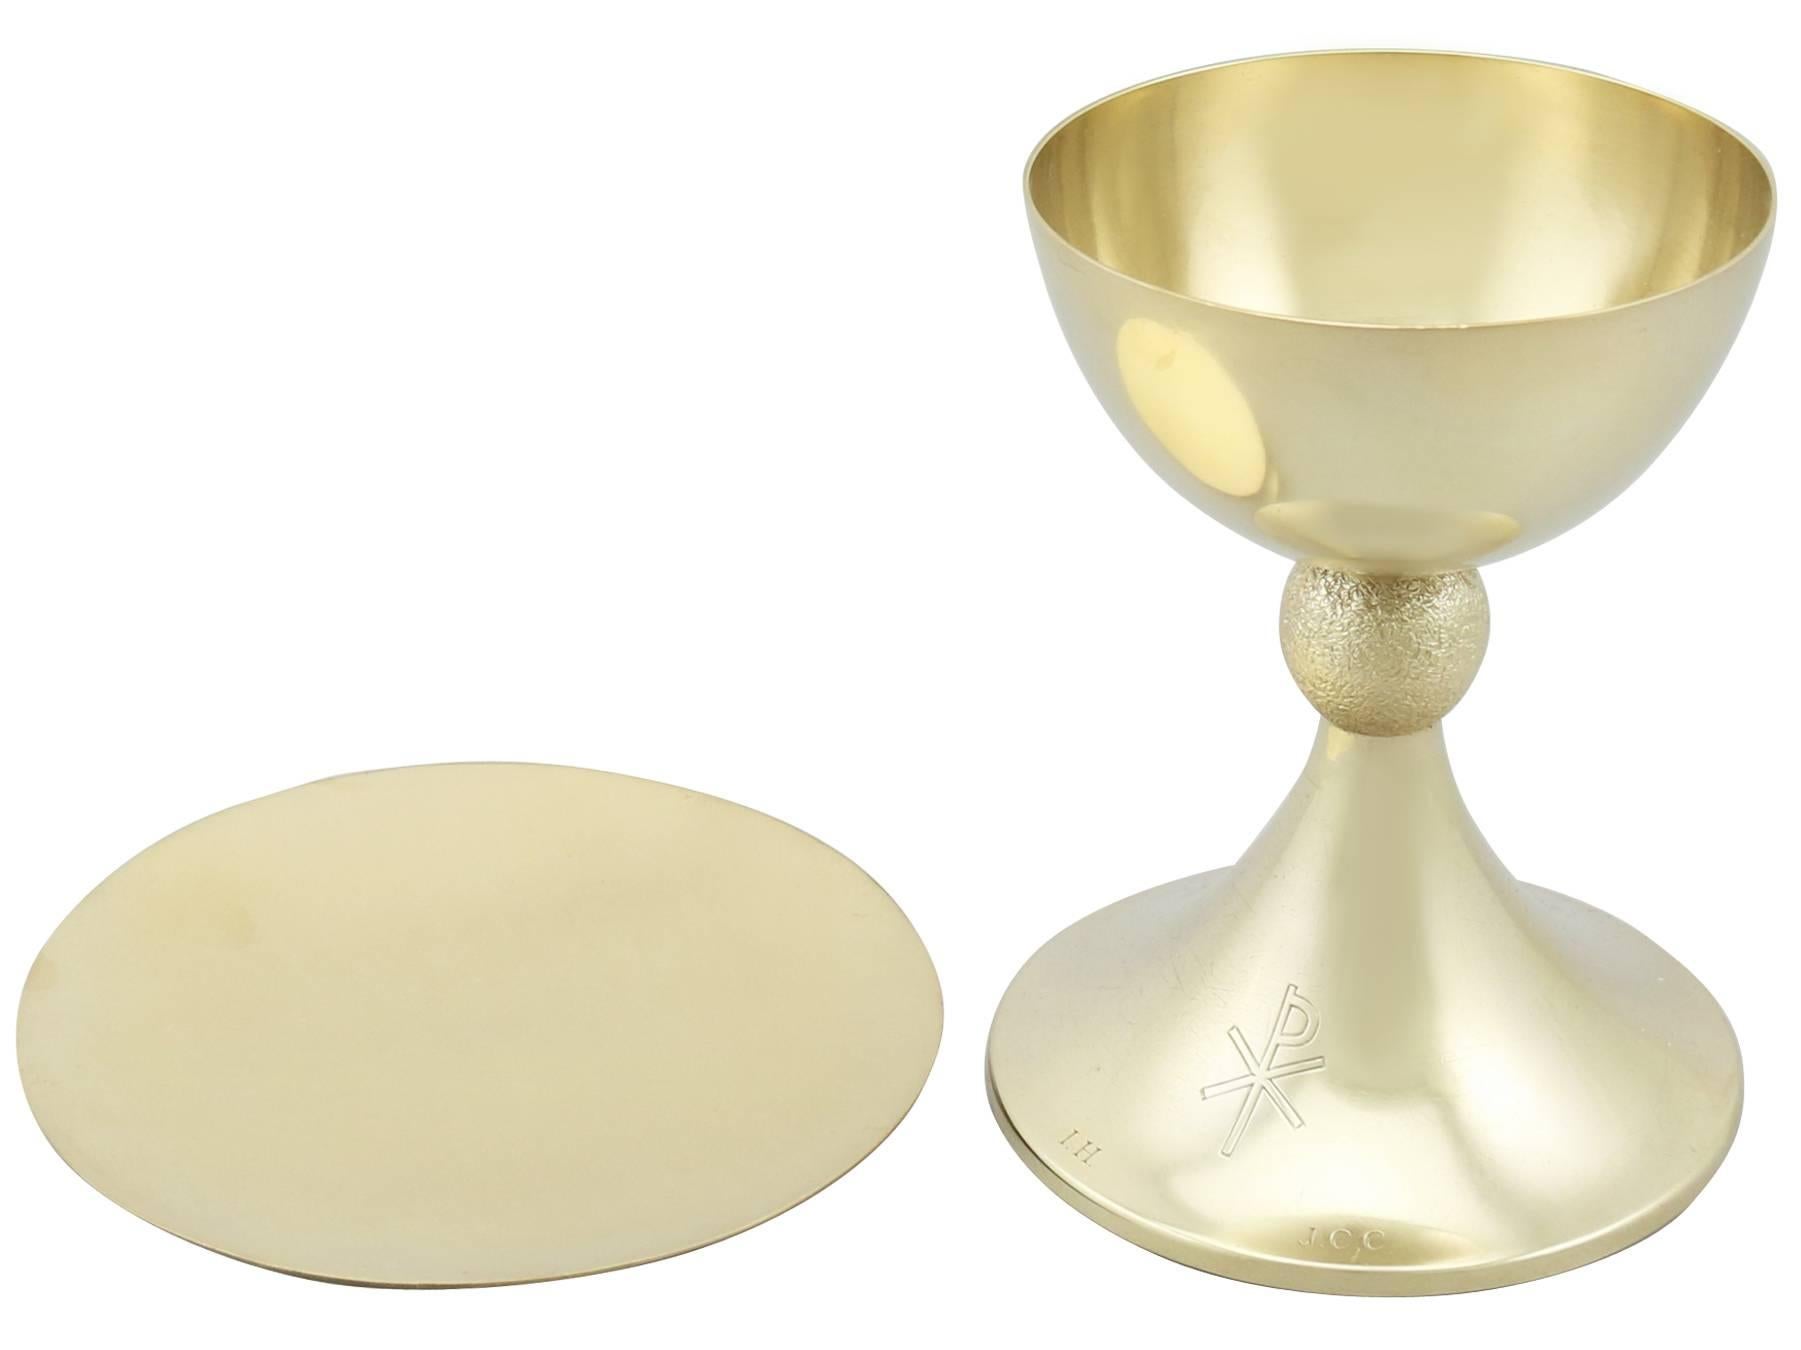 An exceptional, fine and impressive vintage English sterling silver gilt communion set made by A E Jones; an addition to our diverse religious silverware collection.

This exceptional vintage Elizabeth II sterling silver gilt communion set